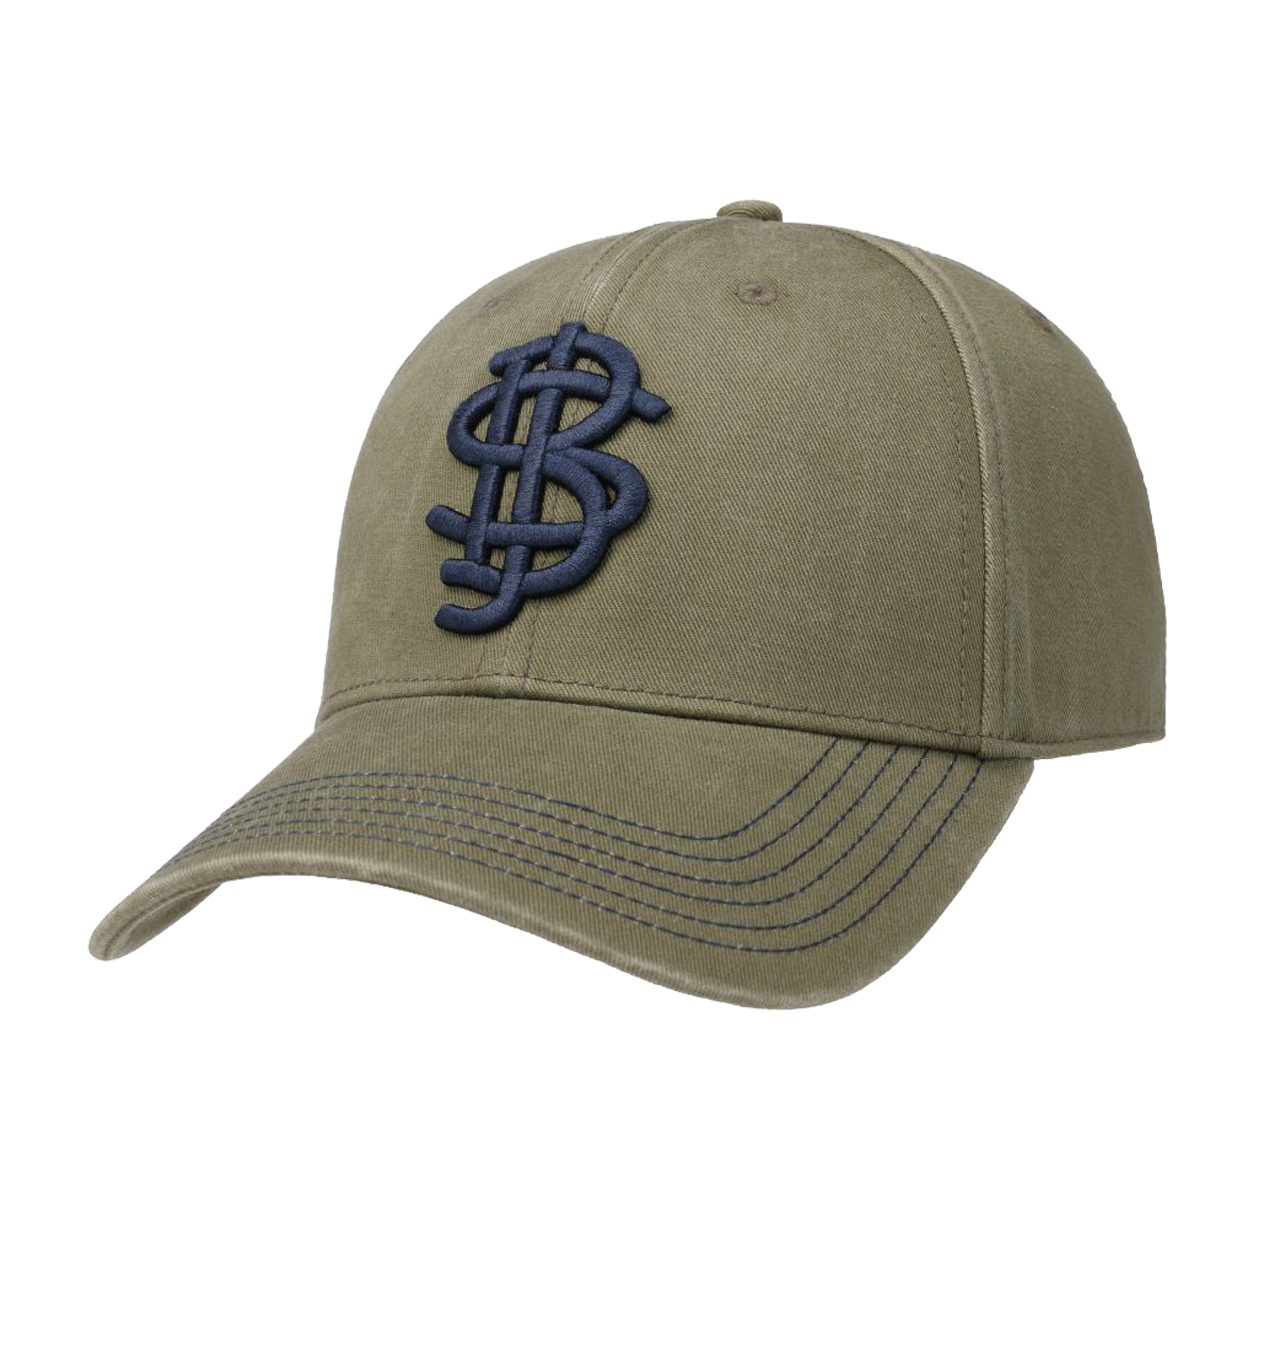 Stetson---Stitched-Logo-Cap-With-UV-Protection---Olive-1